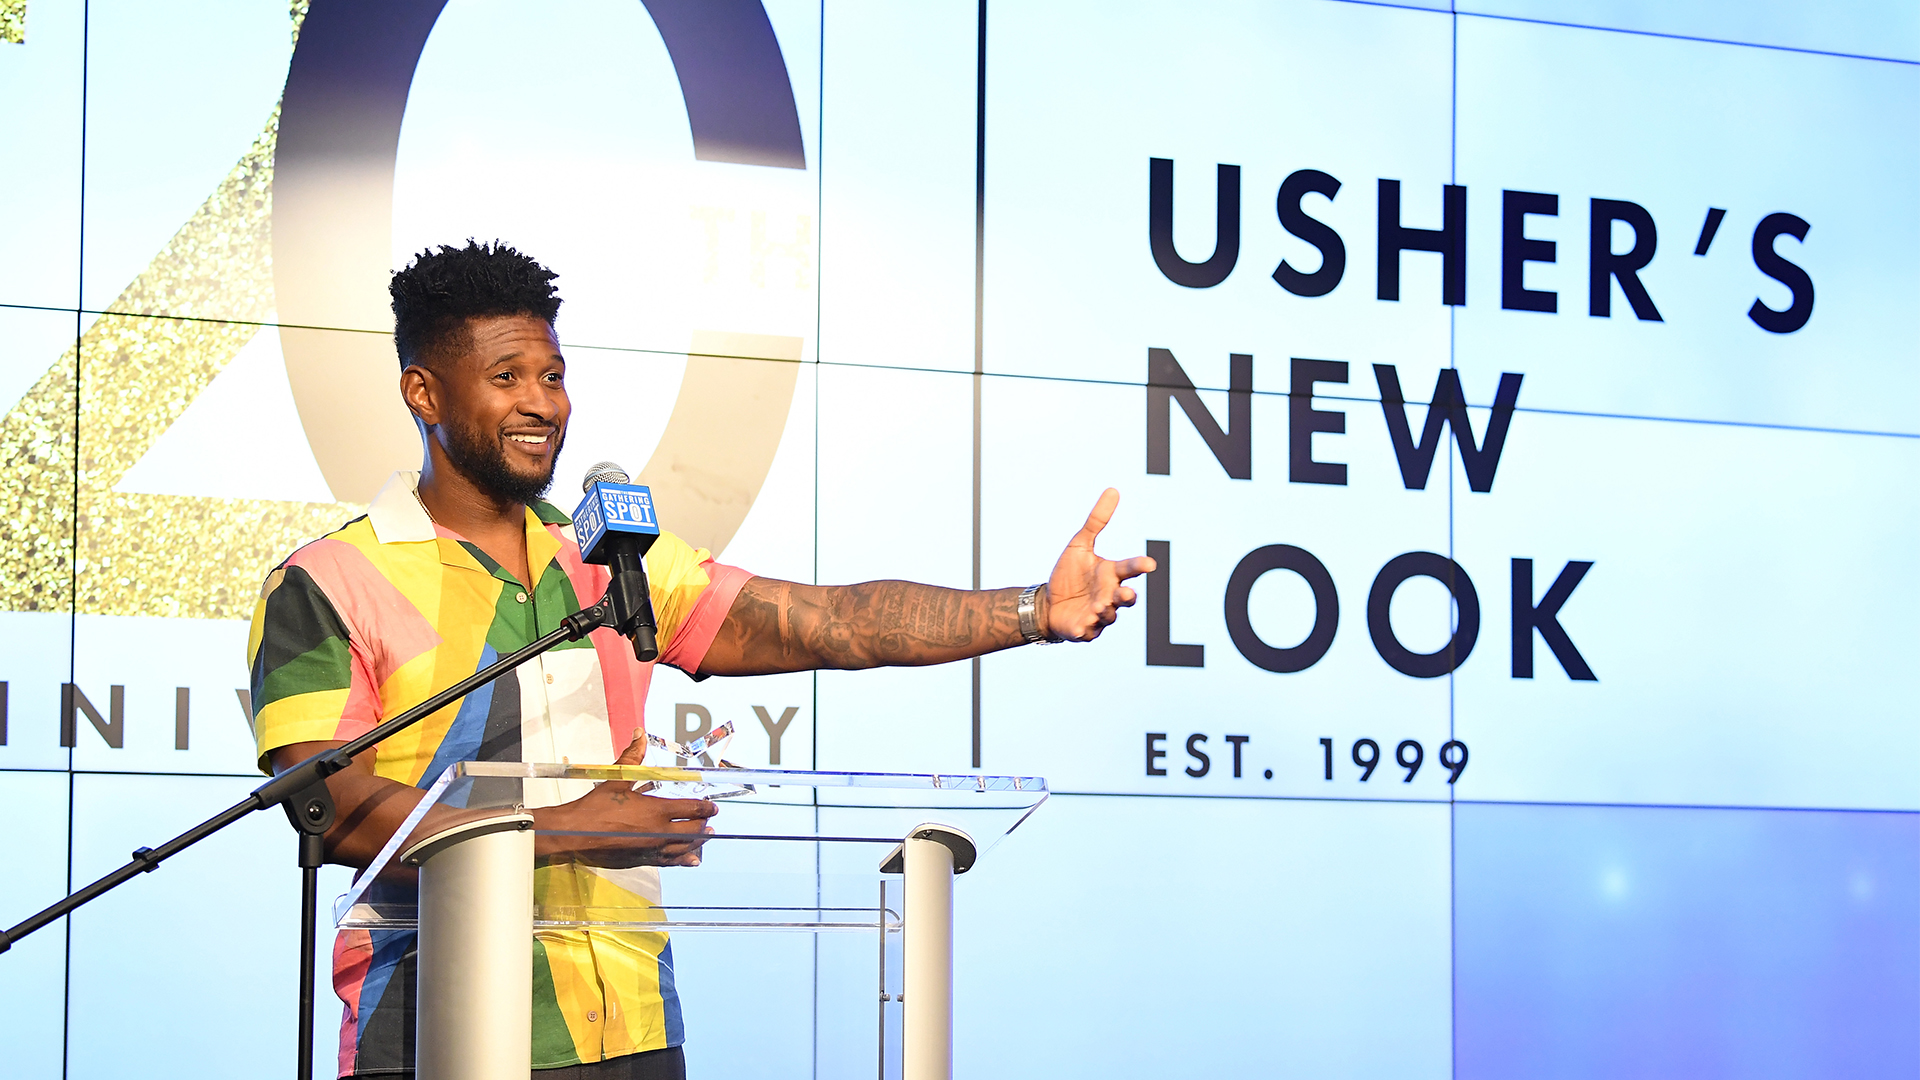 Usher's Nonprofit Has Been Awarded A $500K Grant To Promote Financial Literacy For Youth